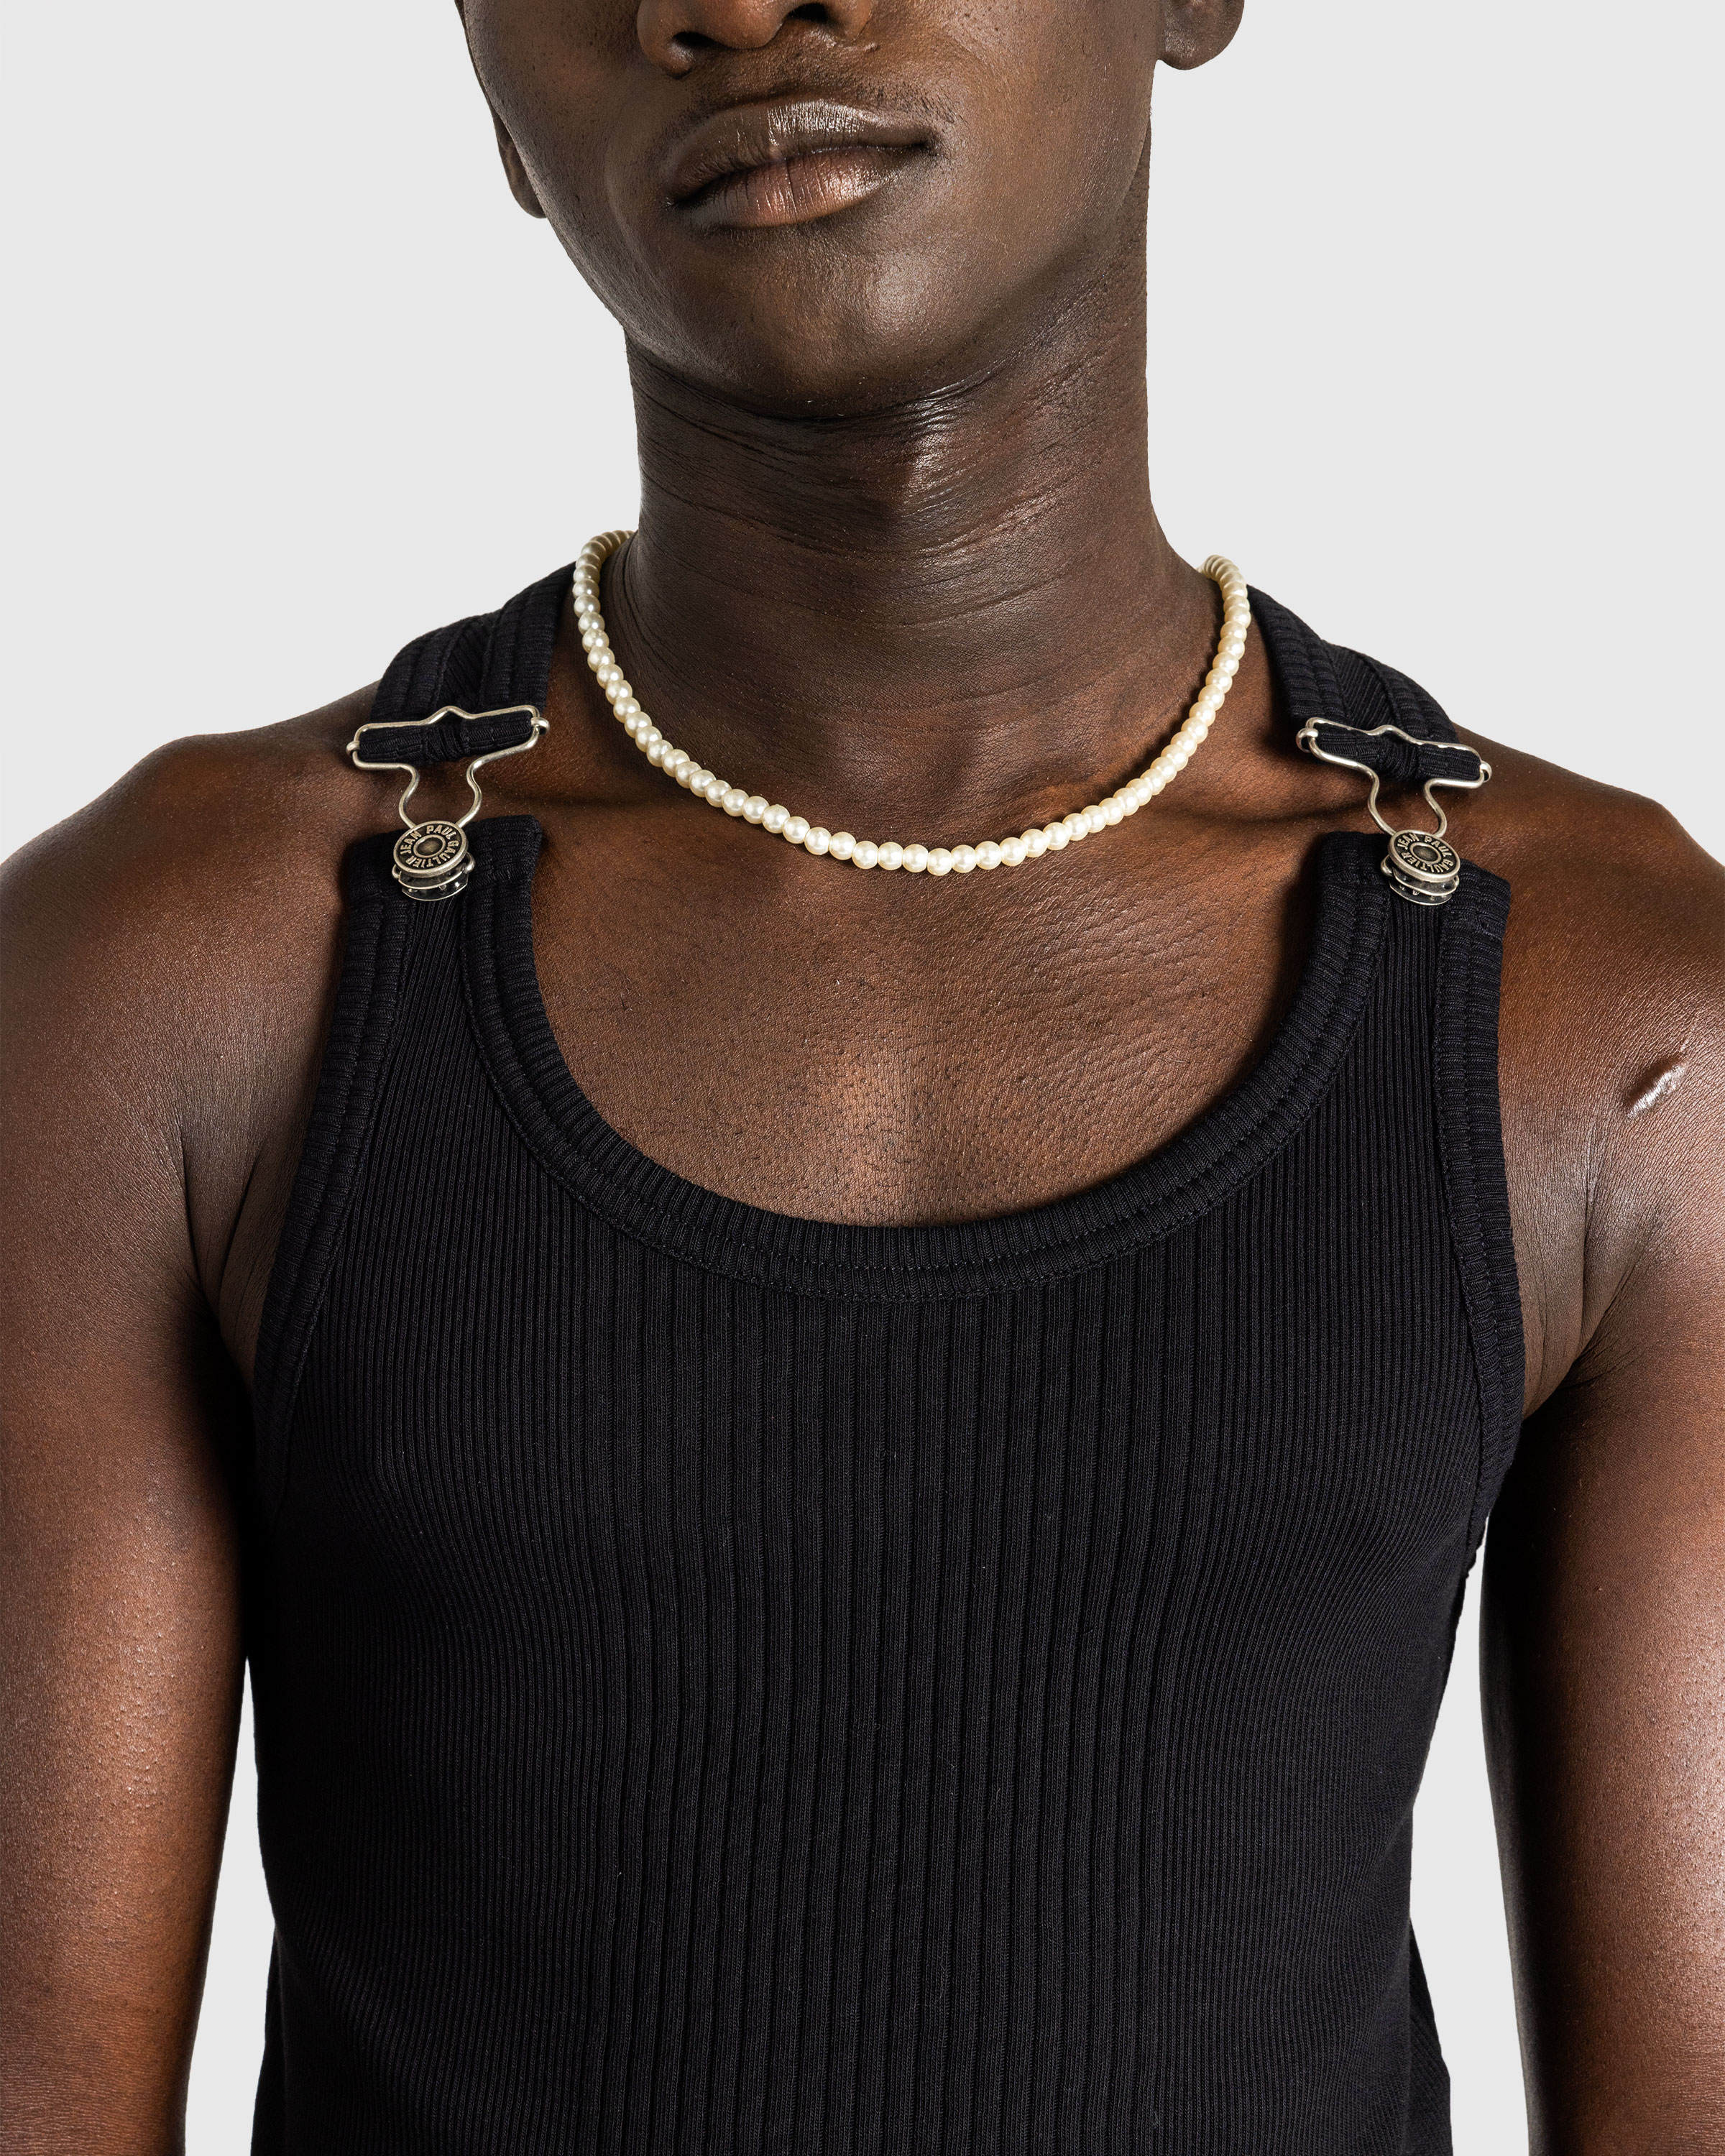 Jean Paul Gaultier – Ribbed Tank Top With Overall Buckles Black - Tank Tops - Black - Image 5